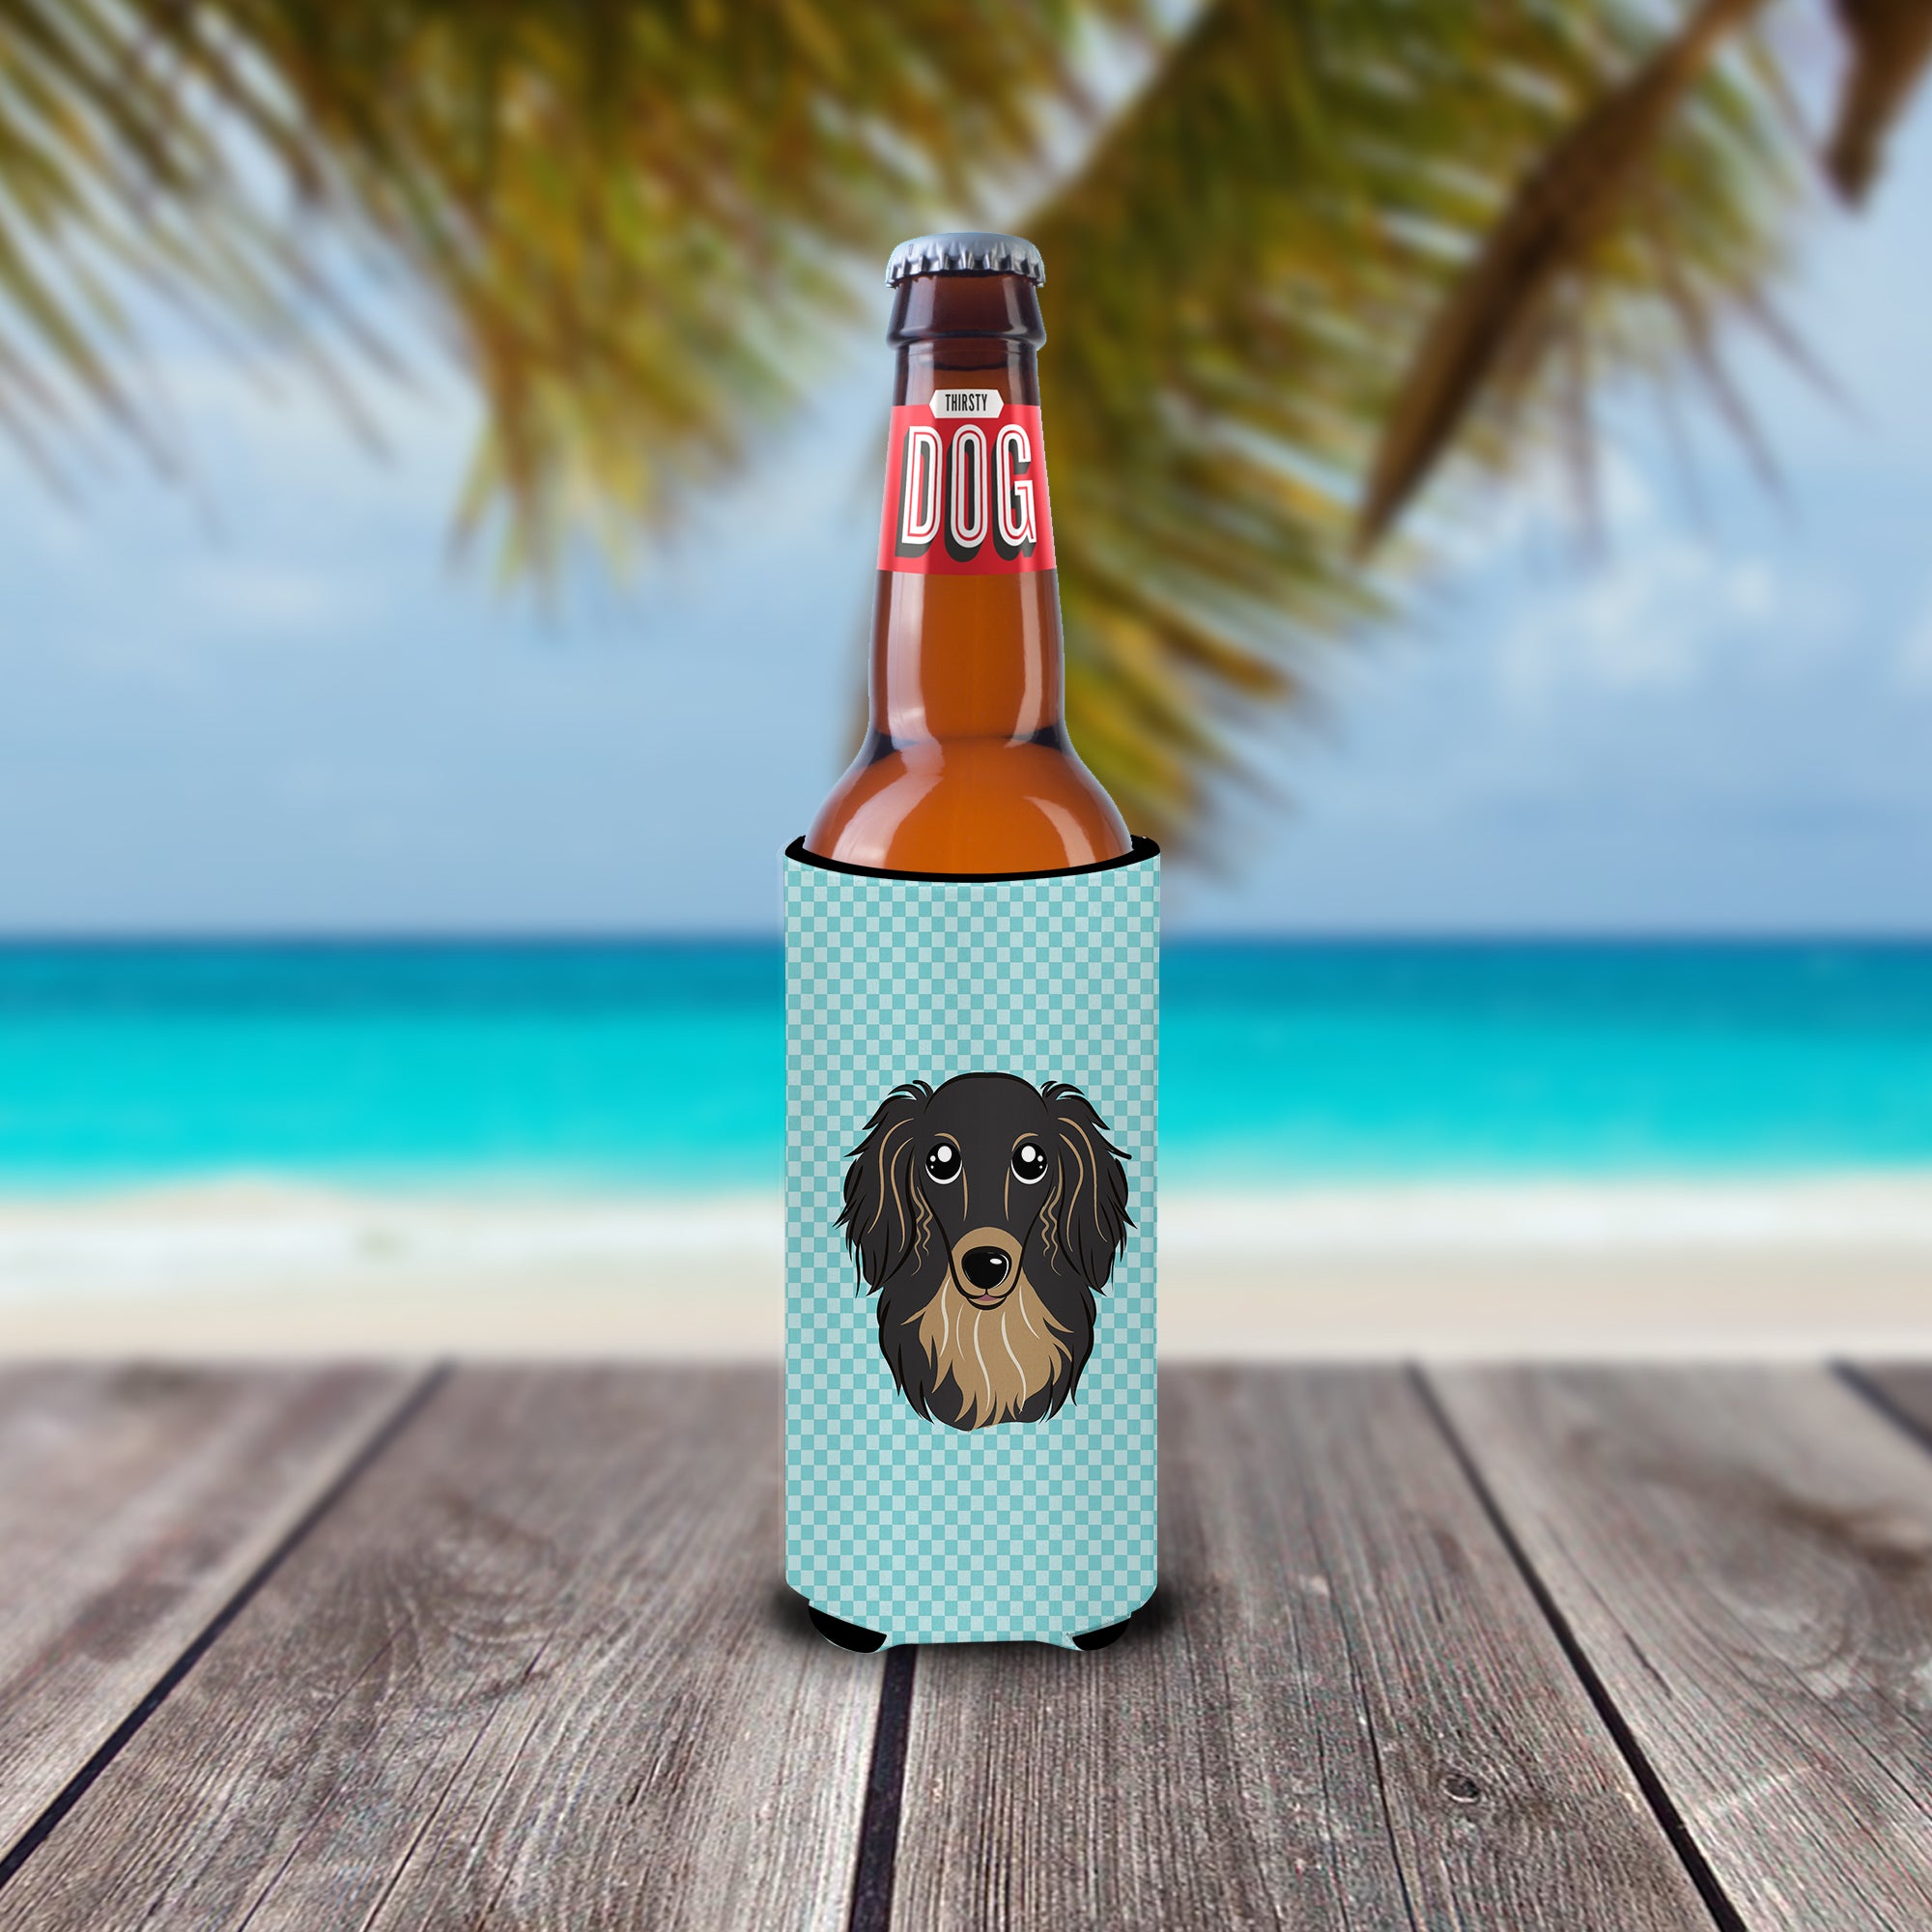 Checkerboard Blue Longhair Dachshund Ultra Beverage Insulators for slim cans.